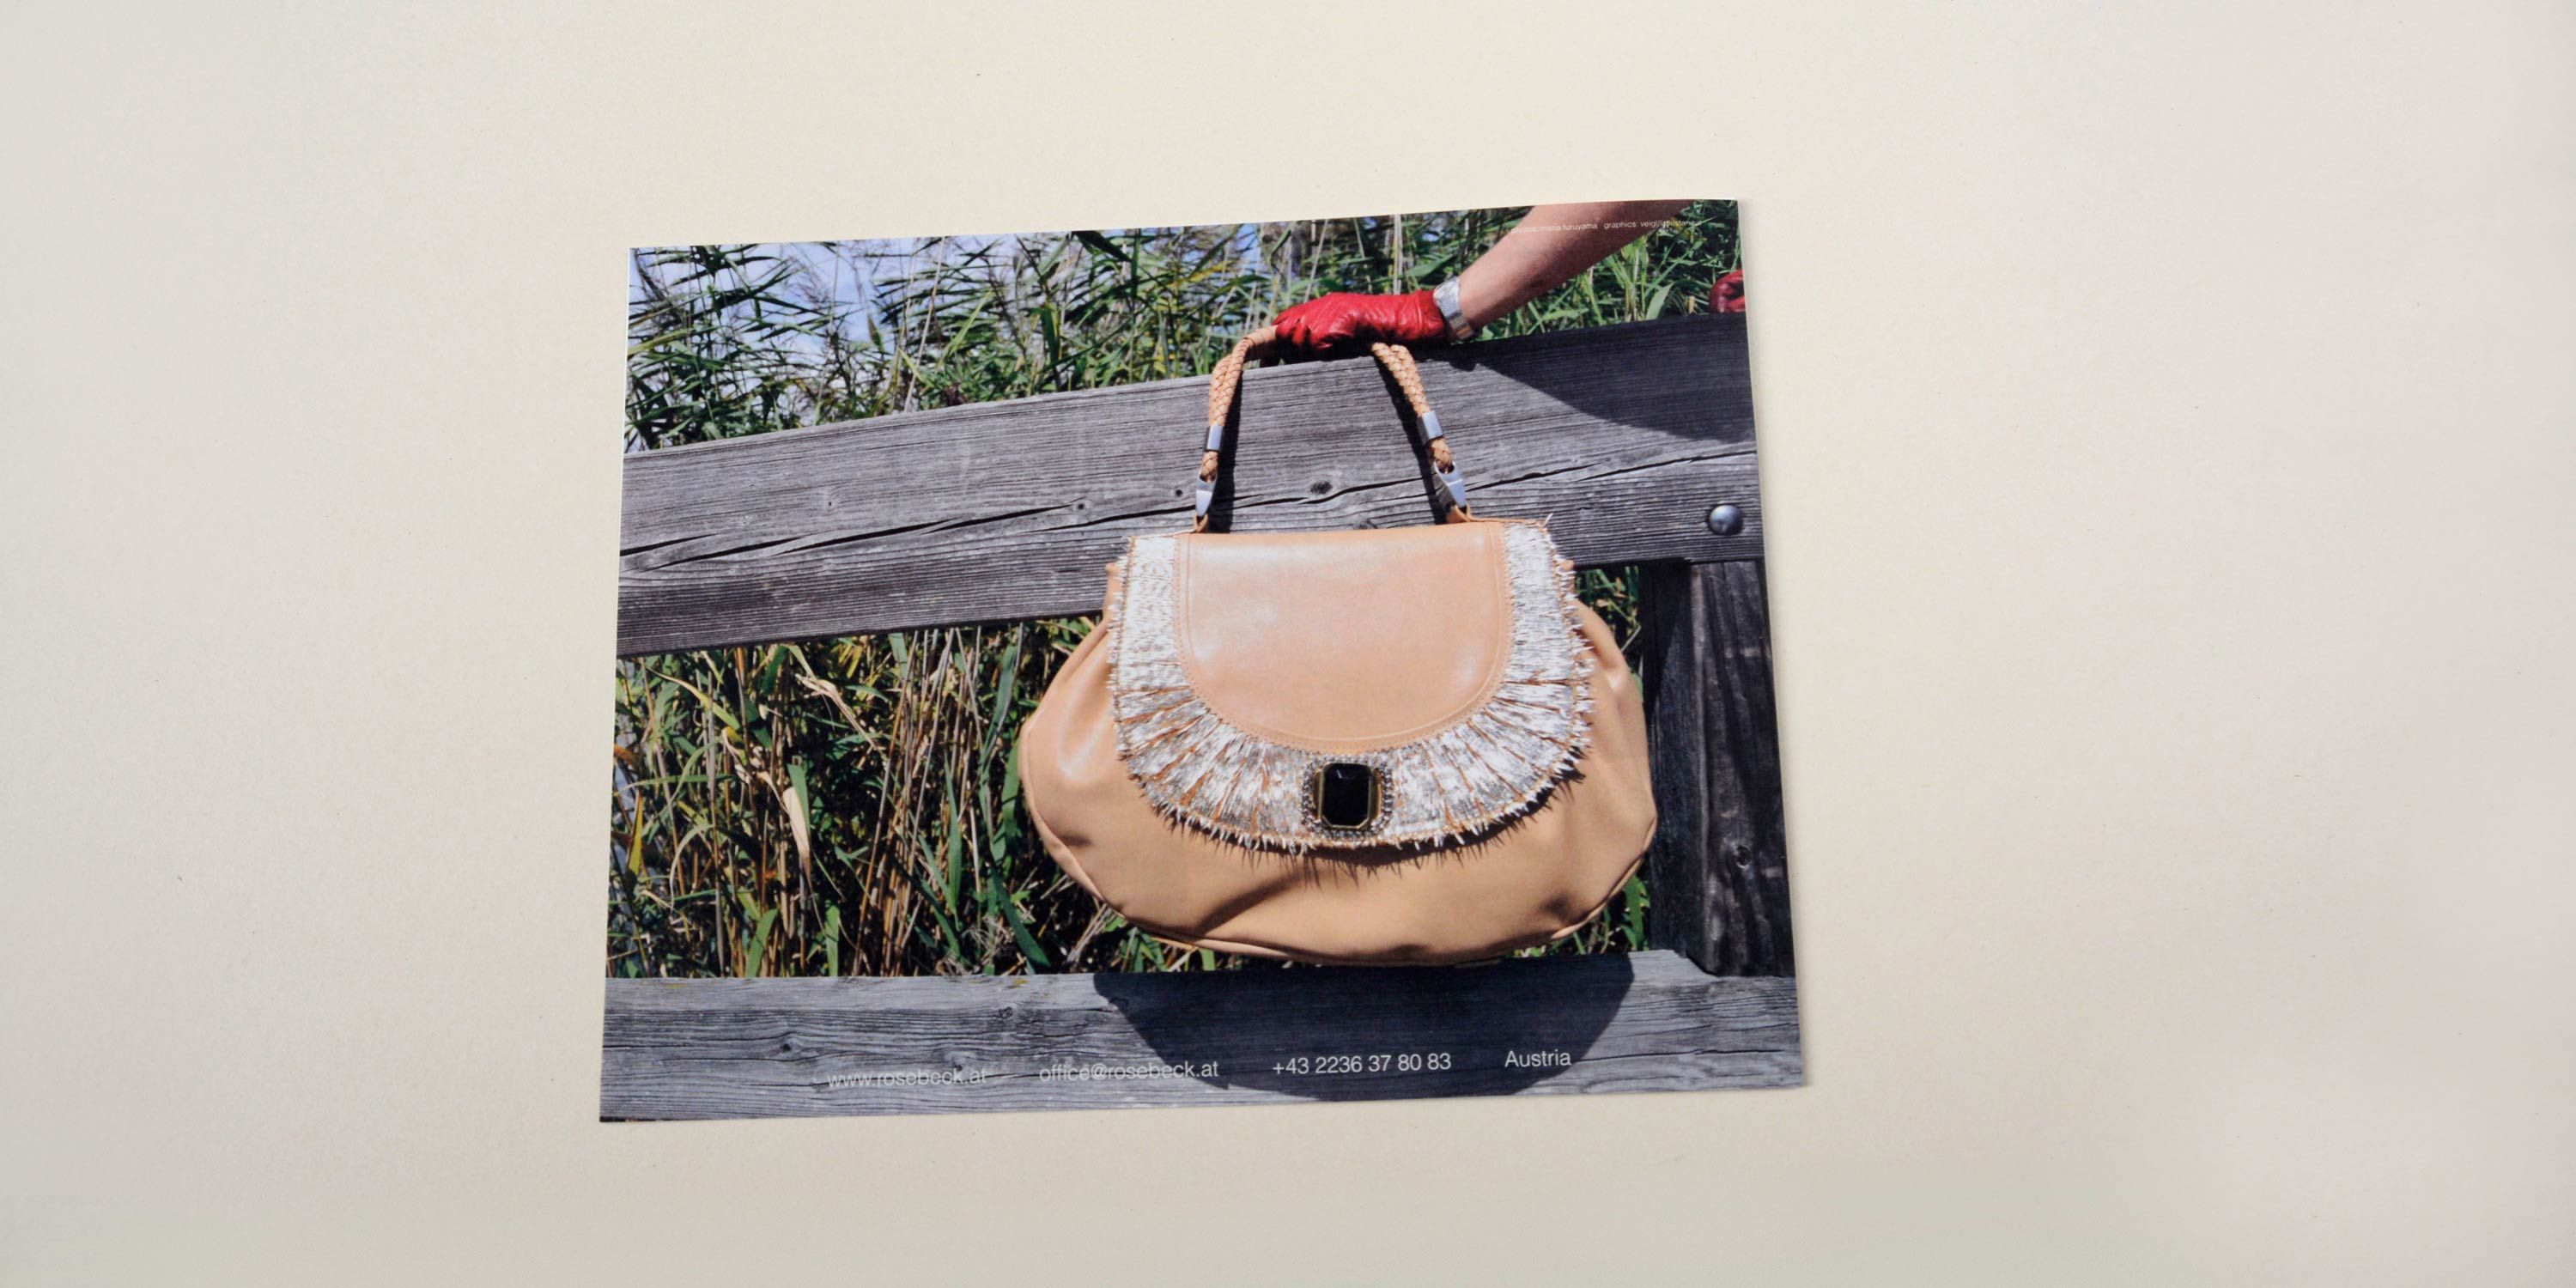 Back catalogue. Full-page photo hand holding large handbag in front of wooden railing. Reeds in the background. Row of small text at bottom overlayed.